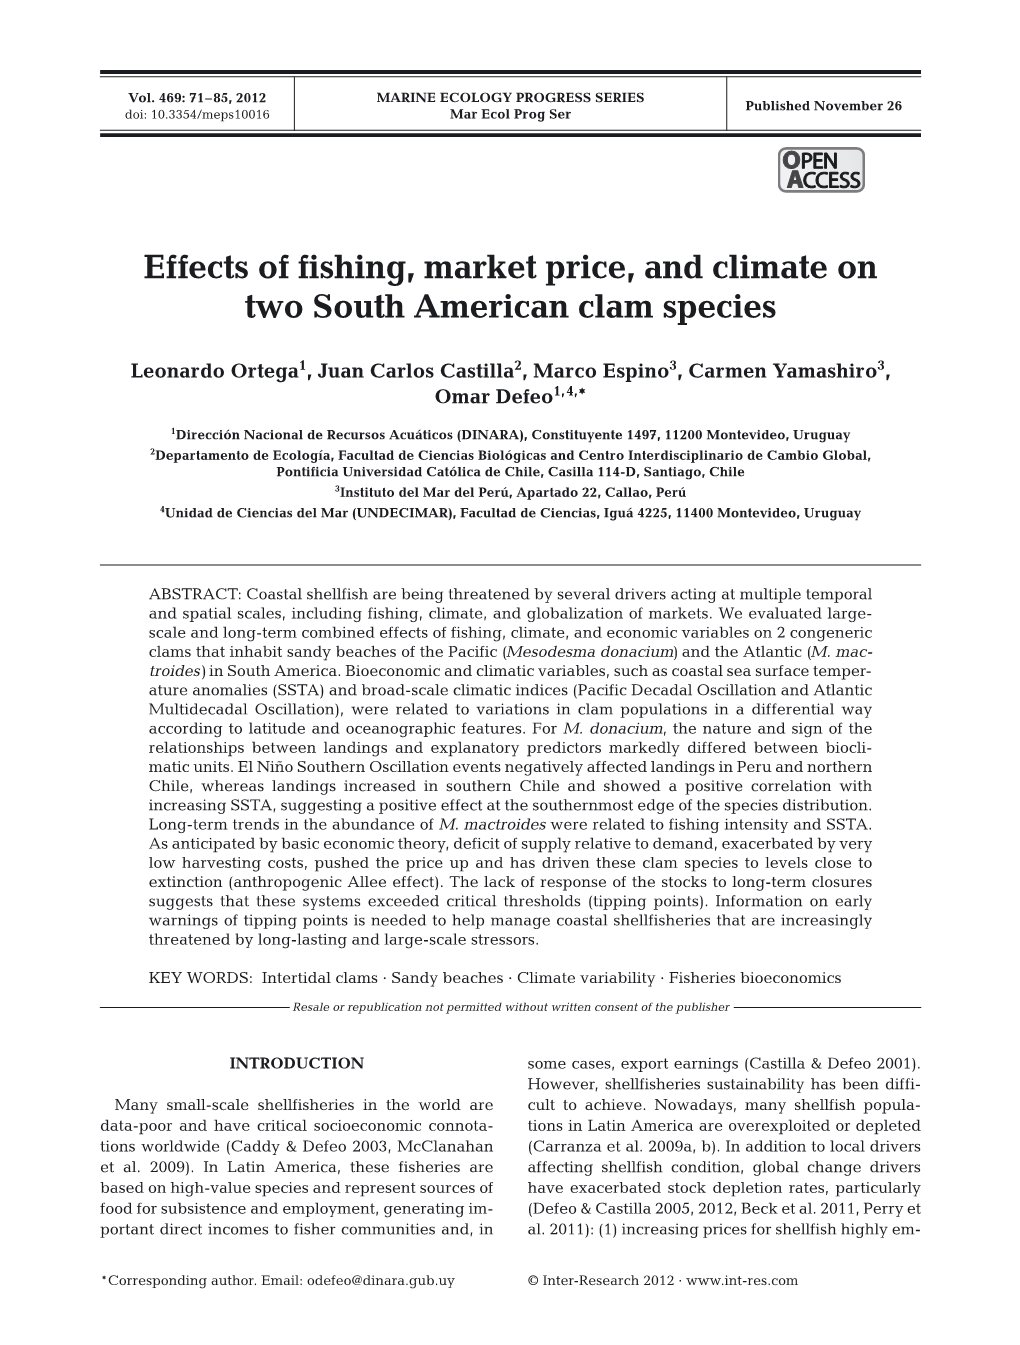 Effects of Fishing, Market Price, and Climate on Two South American Clam Species